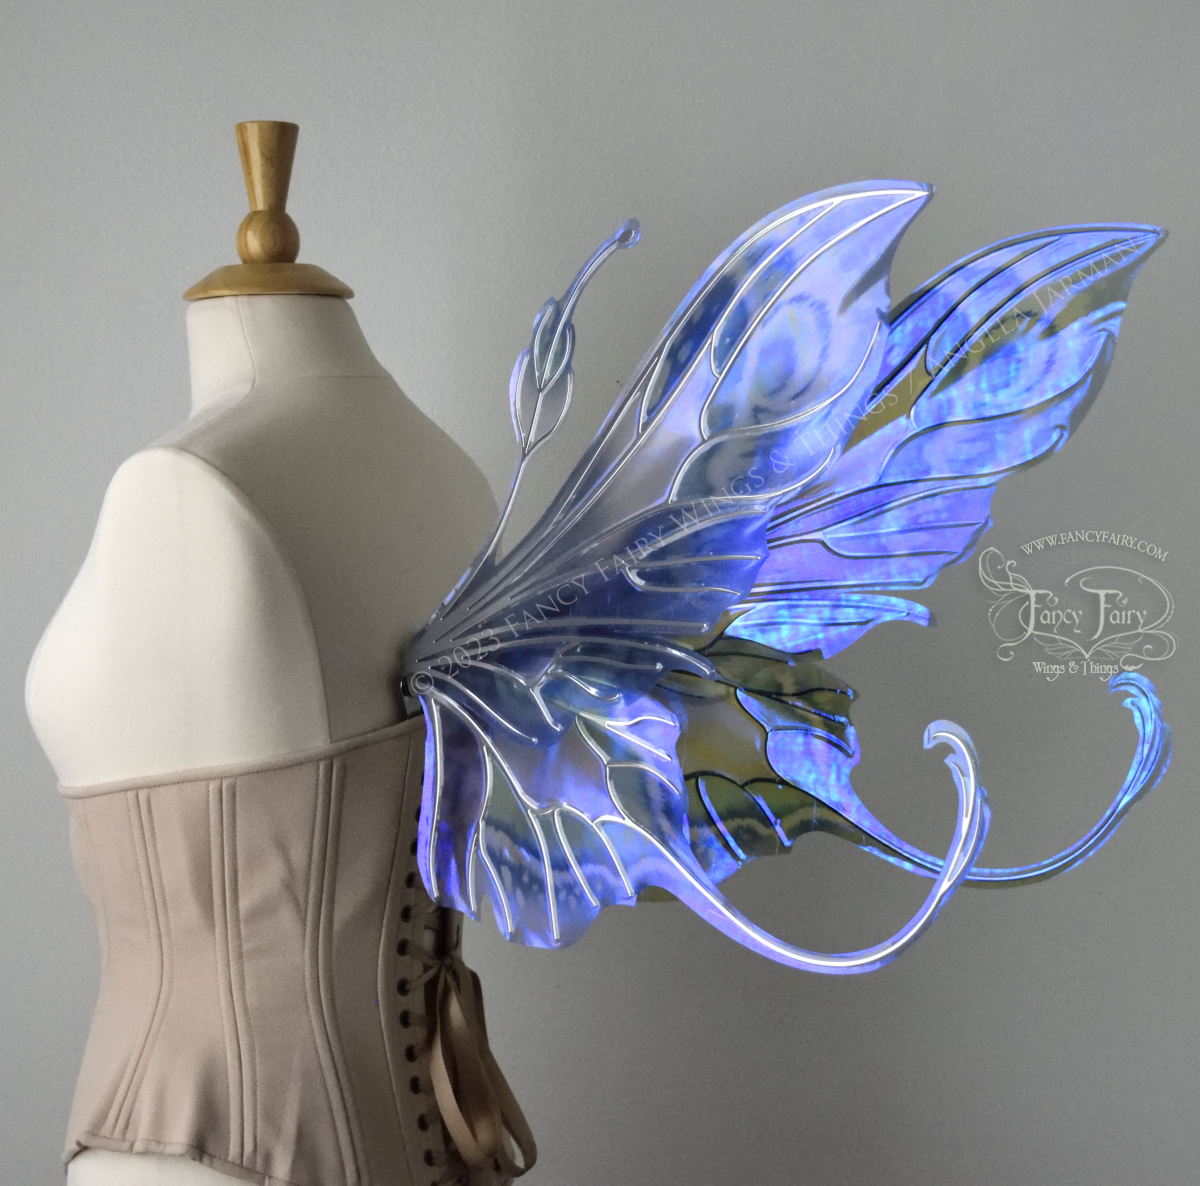 Back 3/4 view of large blue, violet & teal painted iridescent fairy wings, elongated upper panels with antennae, bottom panels have a tail curving upwards, silver veins, worn on a dress form